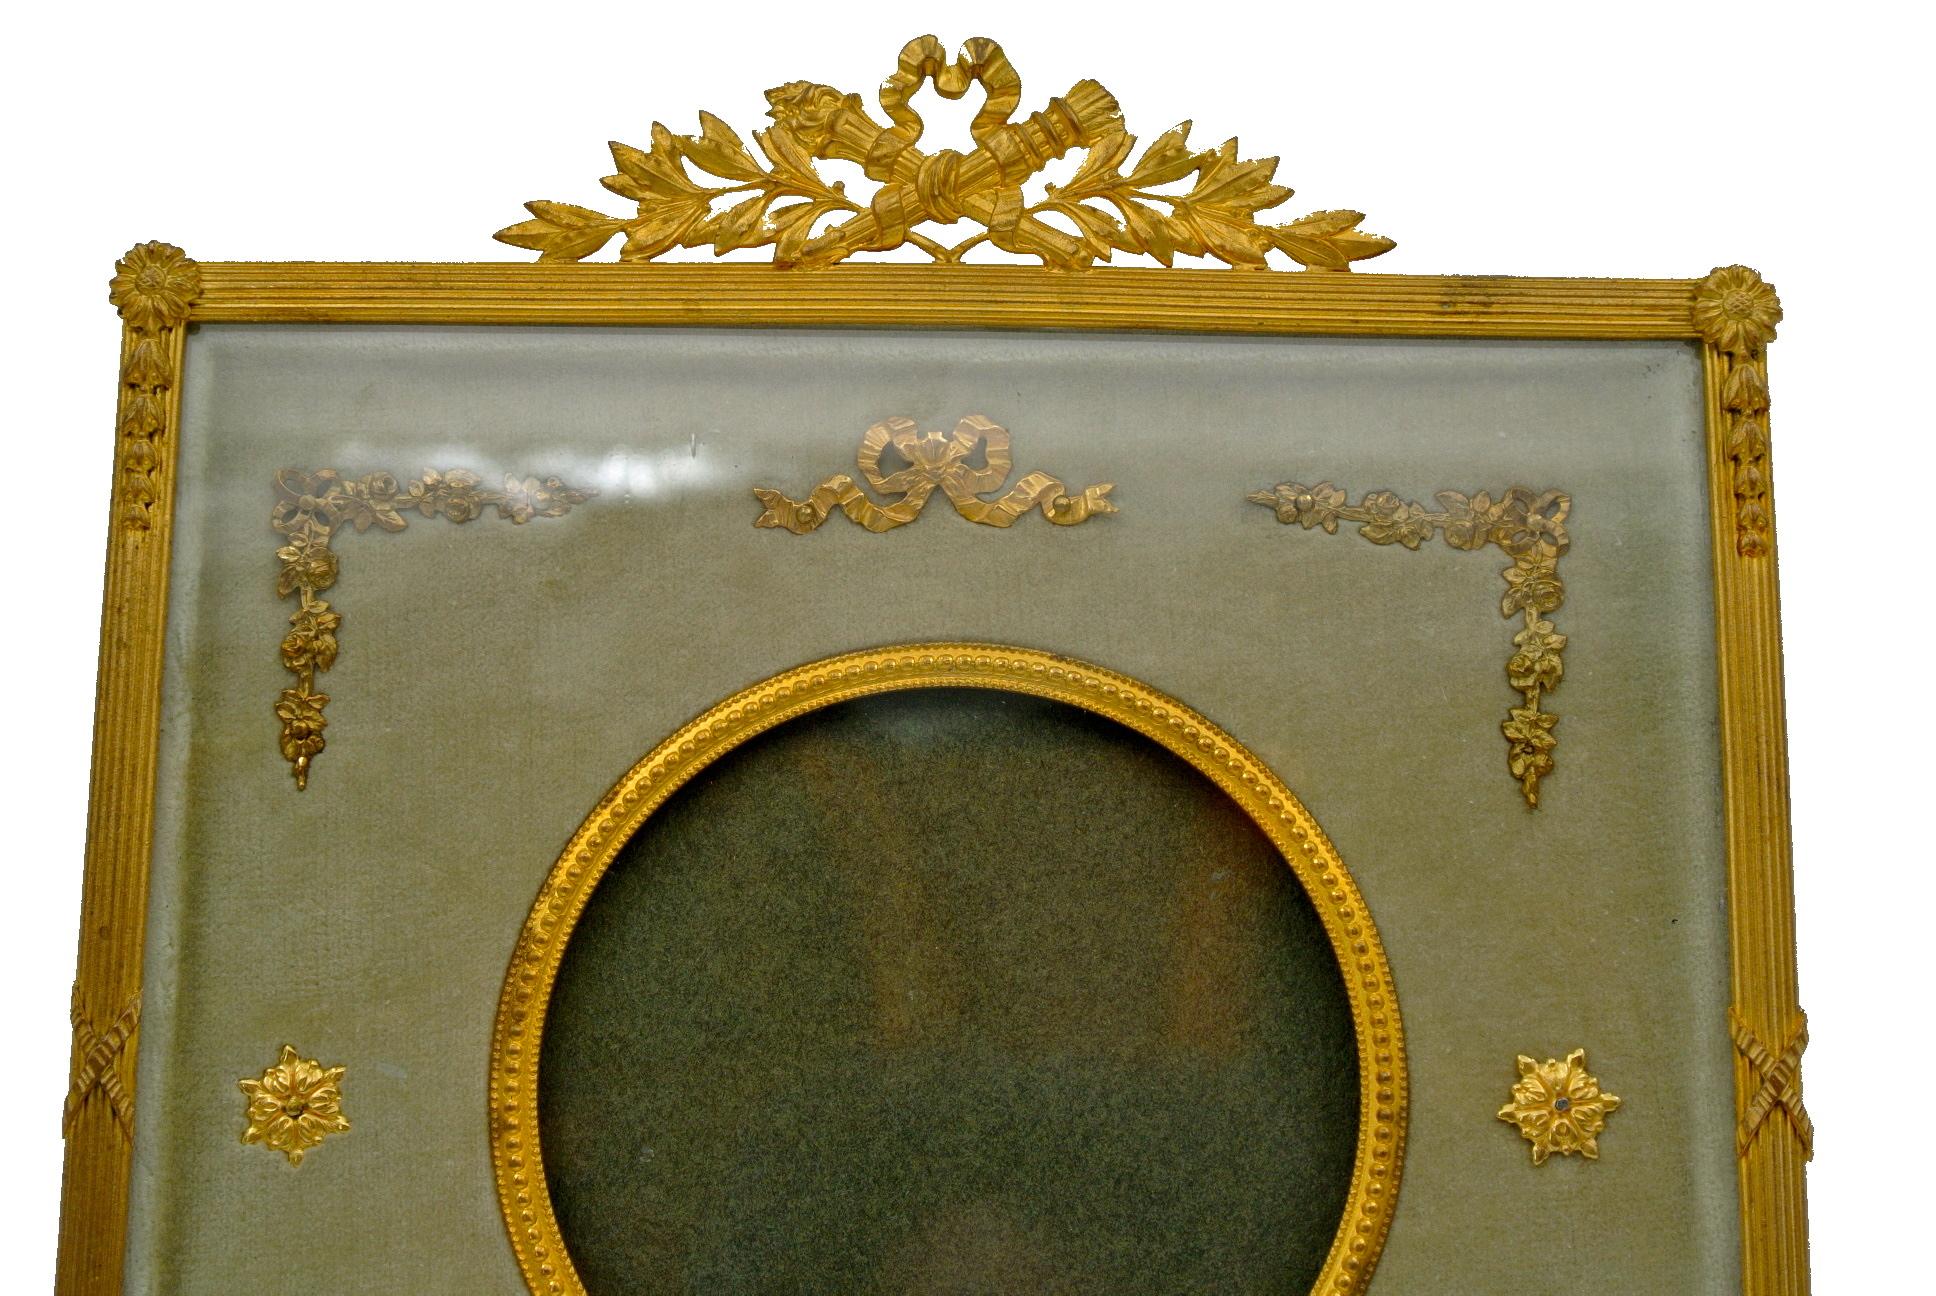 Gilded brass and water green velvet photo frame, Napoleon III period, 19th century
Measures: H 23 cm, W 20 cm, D 2 cm.